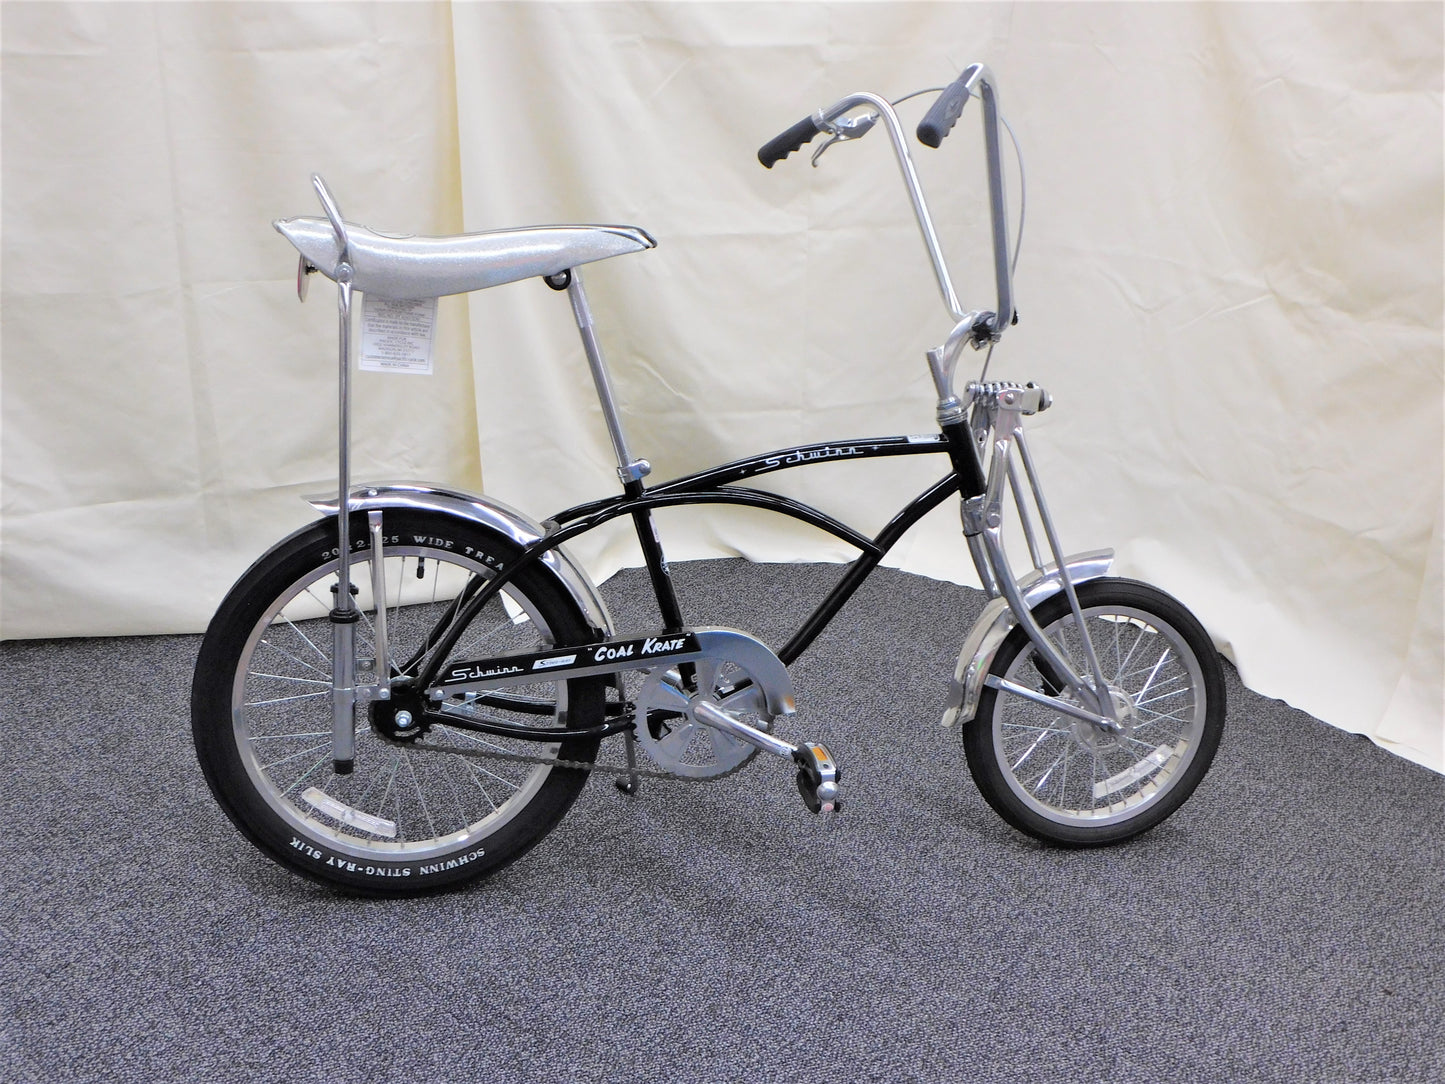 Schwinn Sting-Ray "Coal Krate" Limited Edition Reproduction